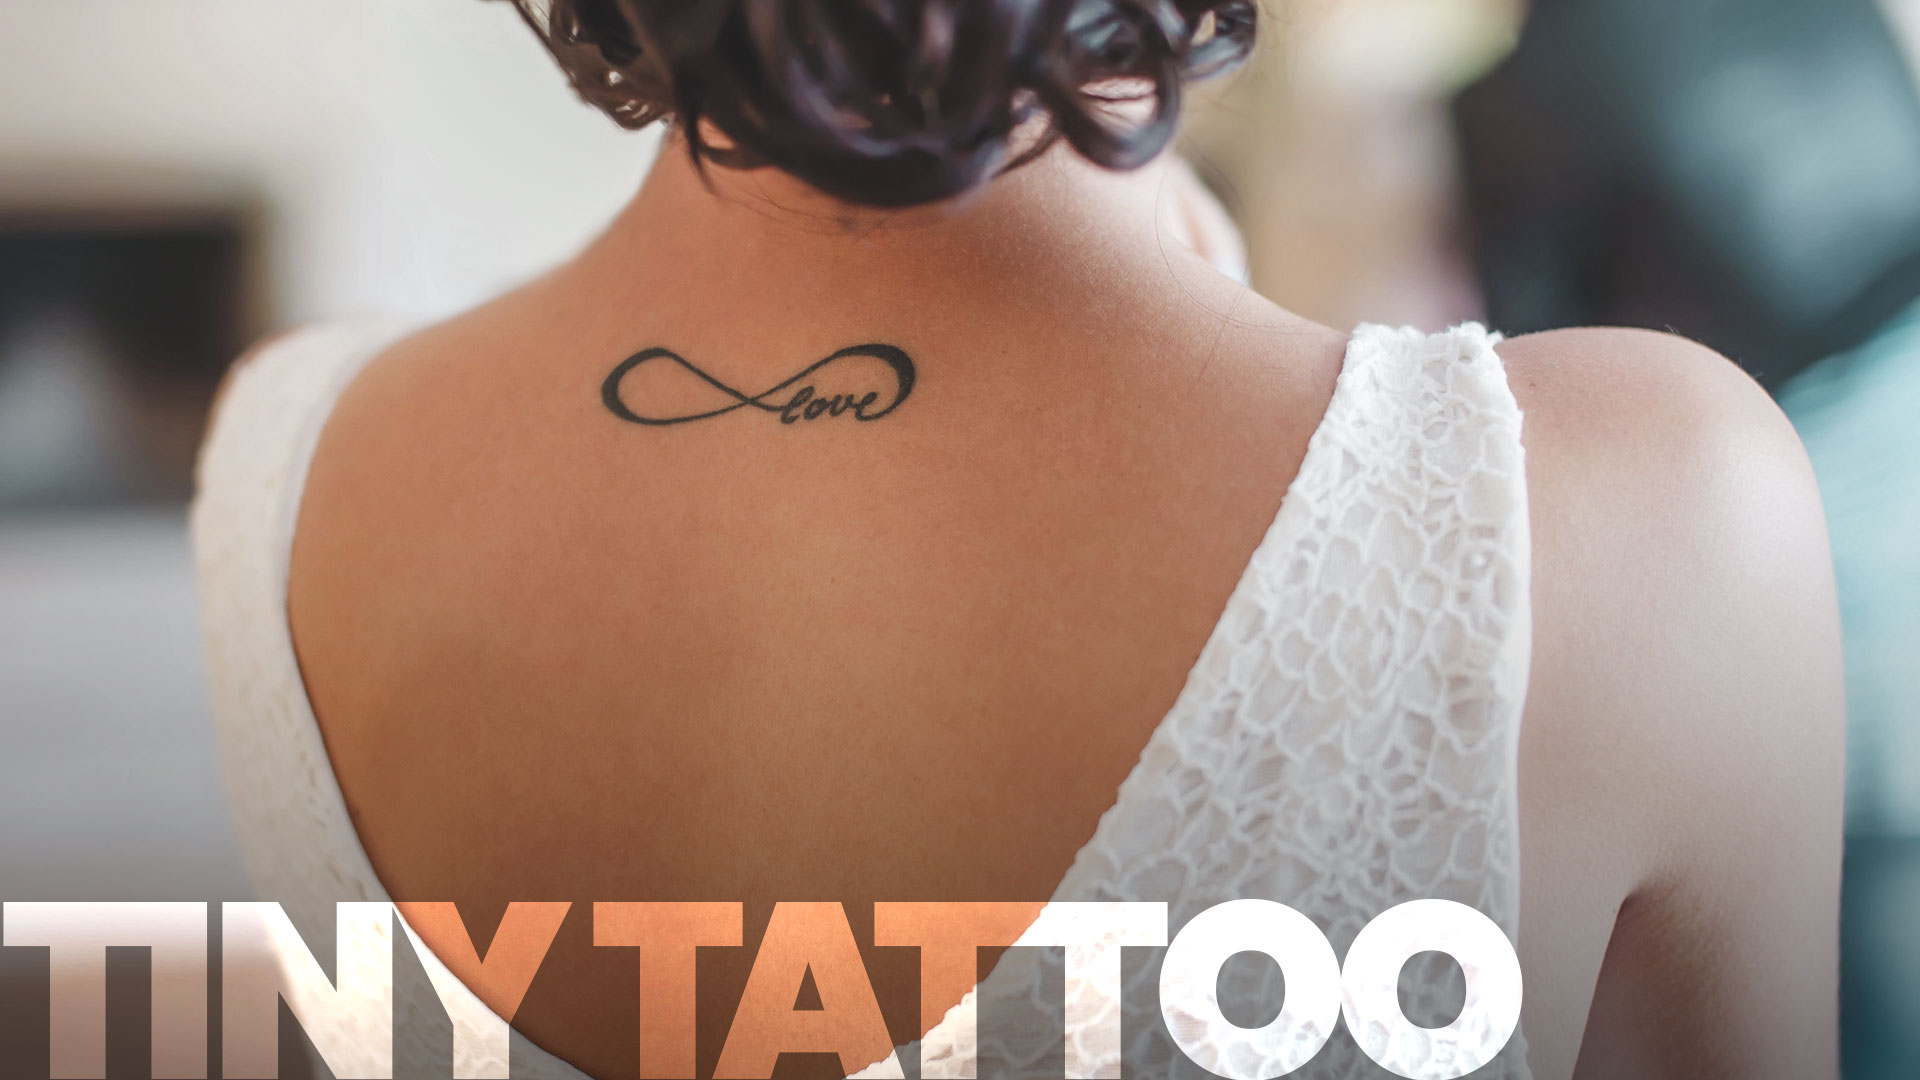 10 Simple Small Tattoo Ideas You'll Want To Get | Beaut.ie